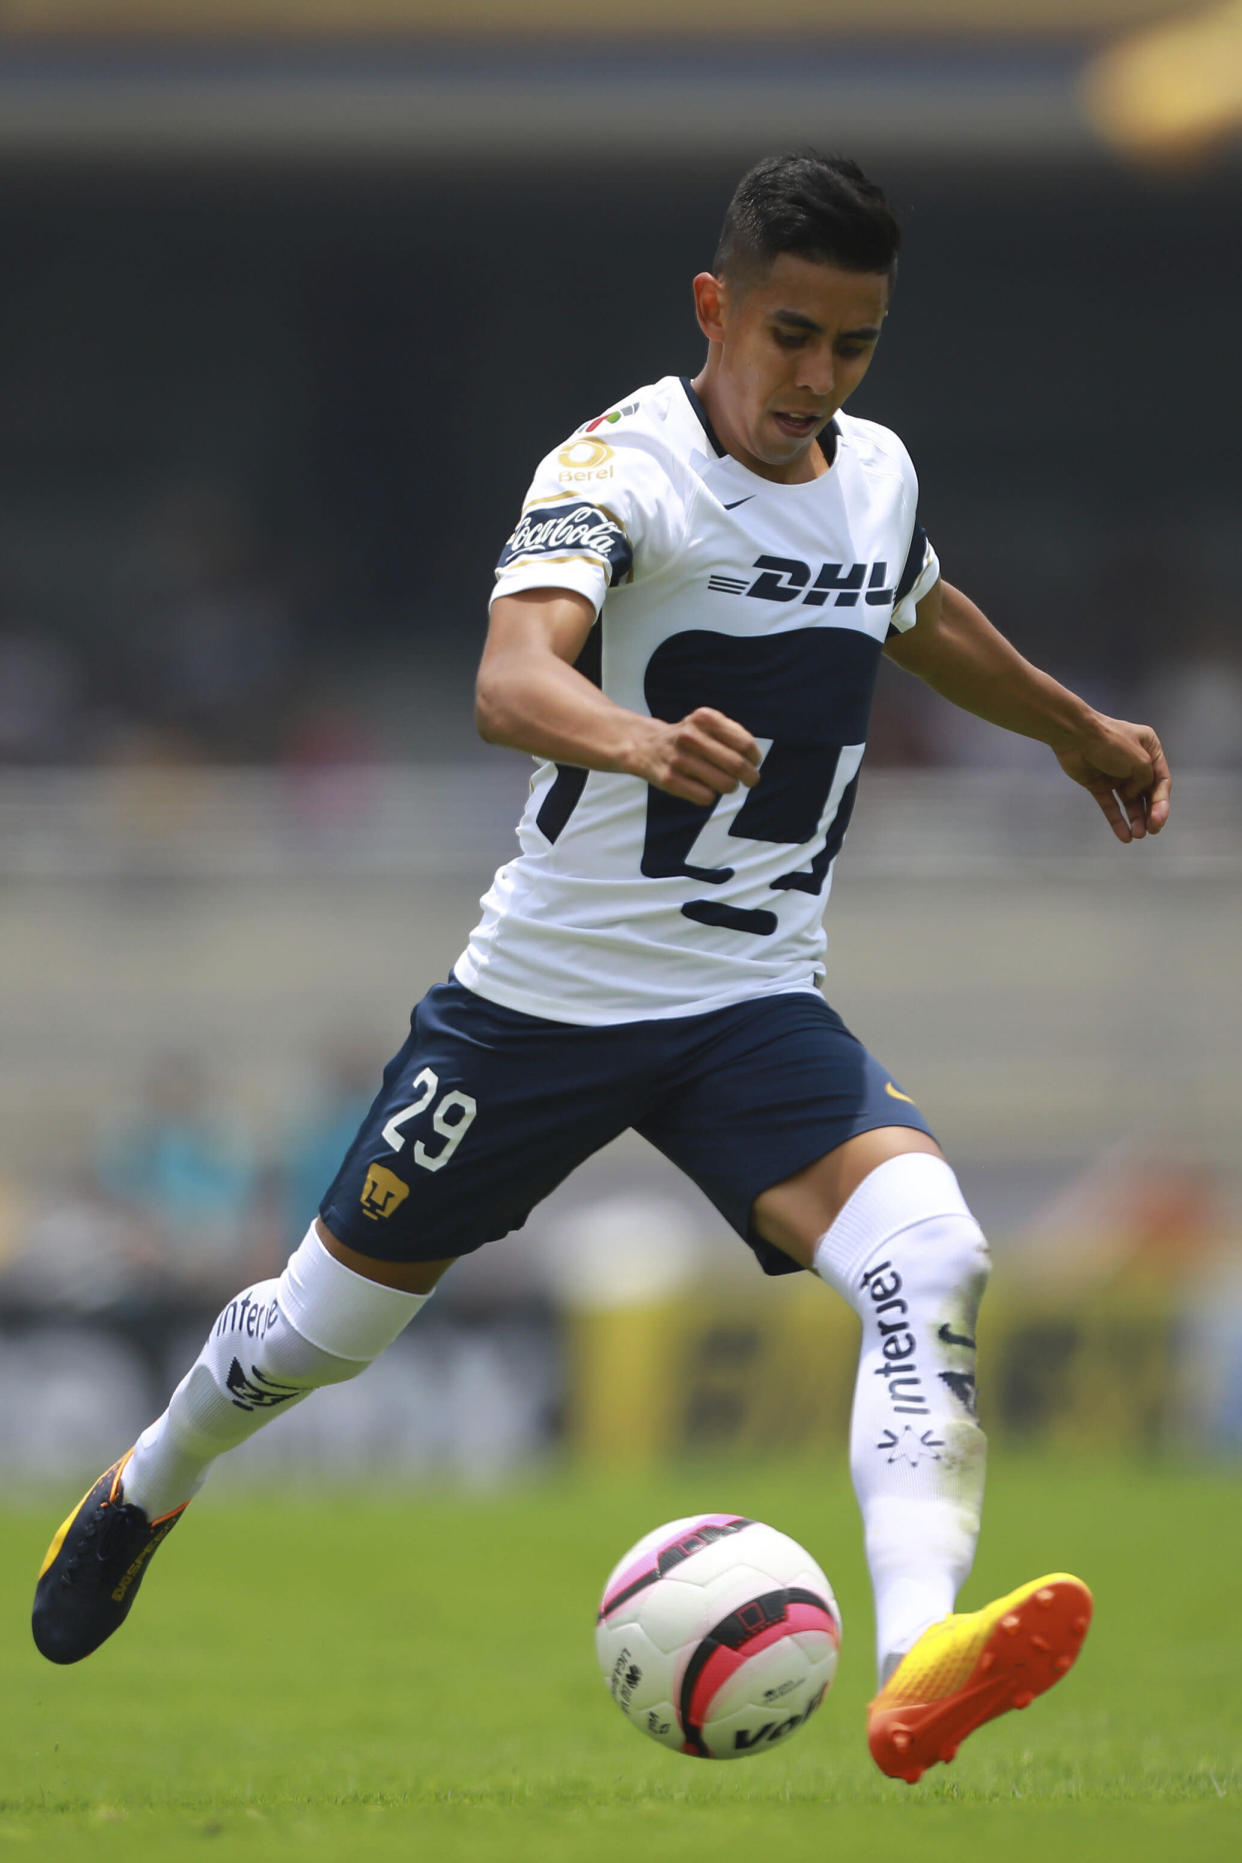 MEXICO CITY, MEXICO - JULY 23: Nestor Calderon of Pumas drives the ball during the 1st round match between Pumas UNAM and Pachuca as part of the Torneo Apertura 2017 Liga MX at Olimpico Universitario Stadium on July 23, 2017 in Mexico City, Mexico. (Photo by Hector Vivas/LatinContent/Getty Images)